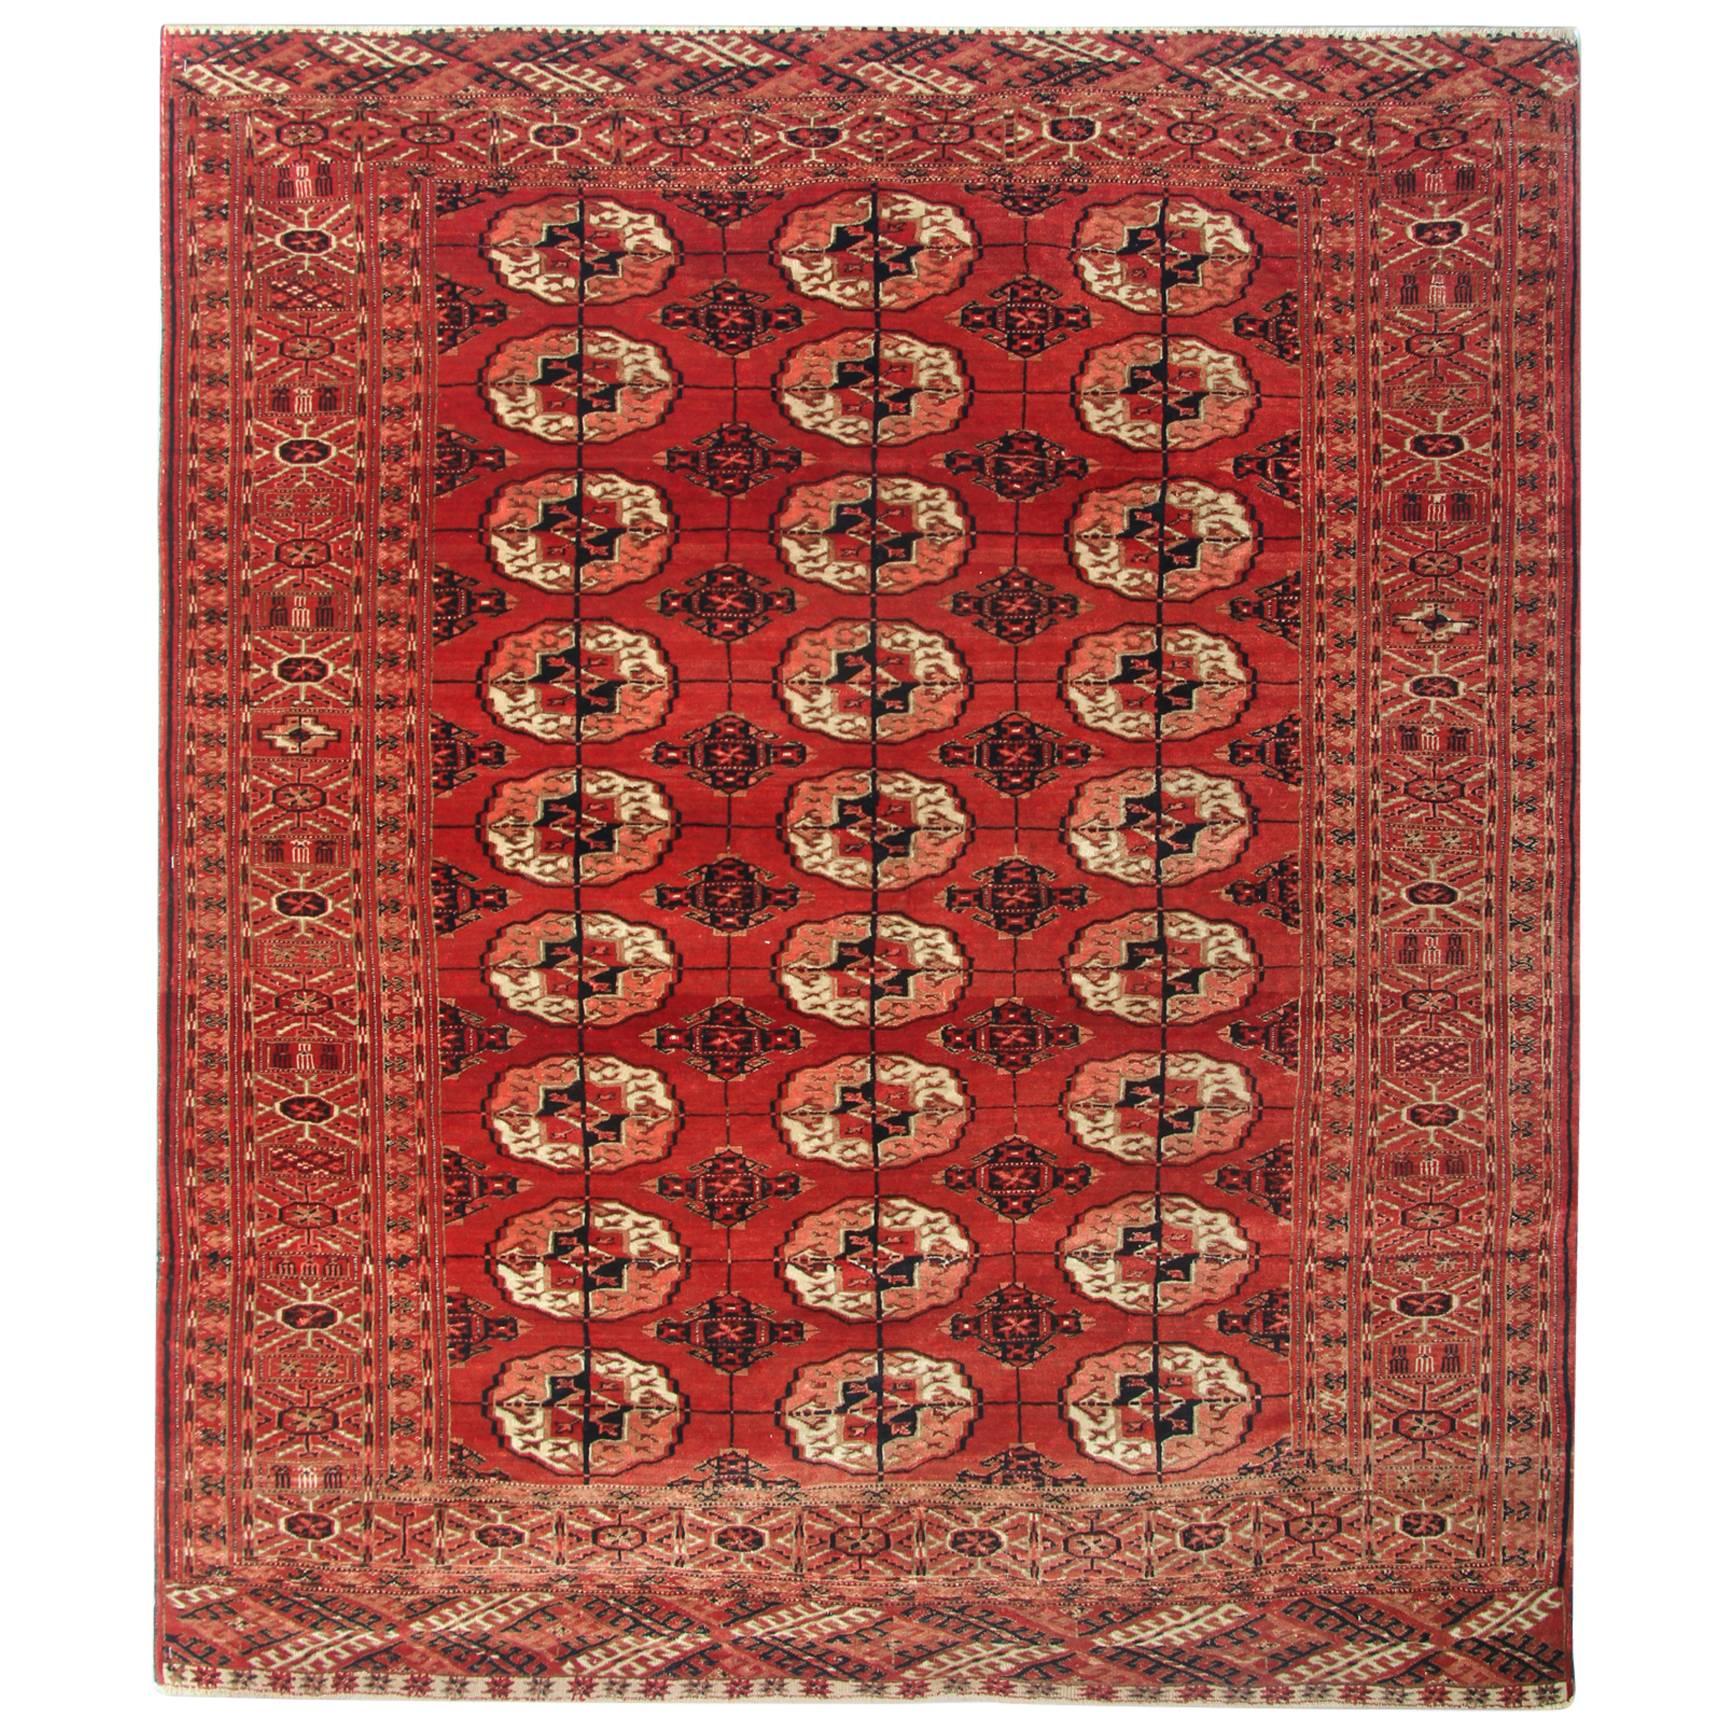 Antique Rugs, Hand Made Carpet Oriental Rug, Turkmen Rugs for Sale